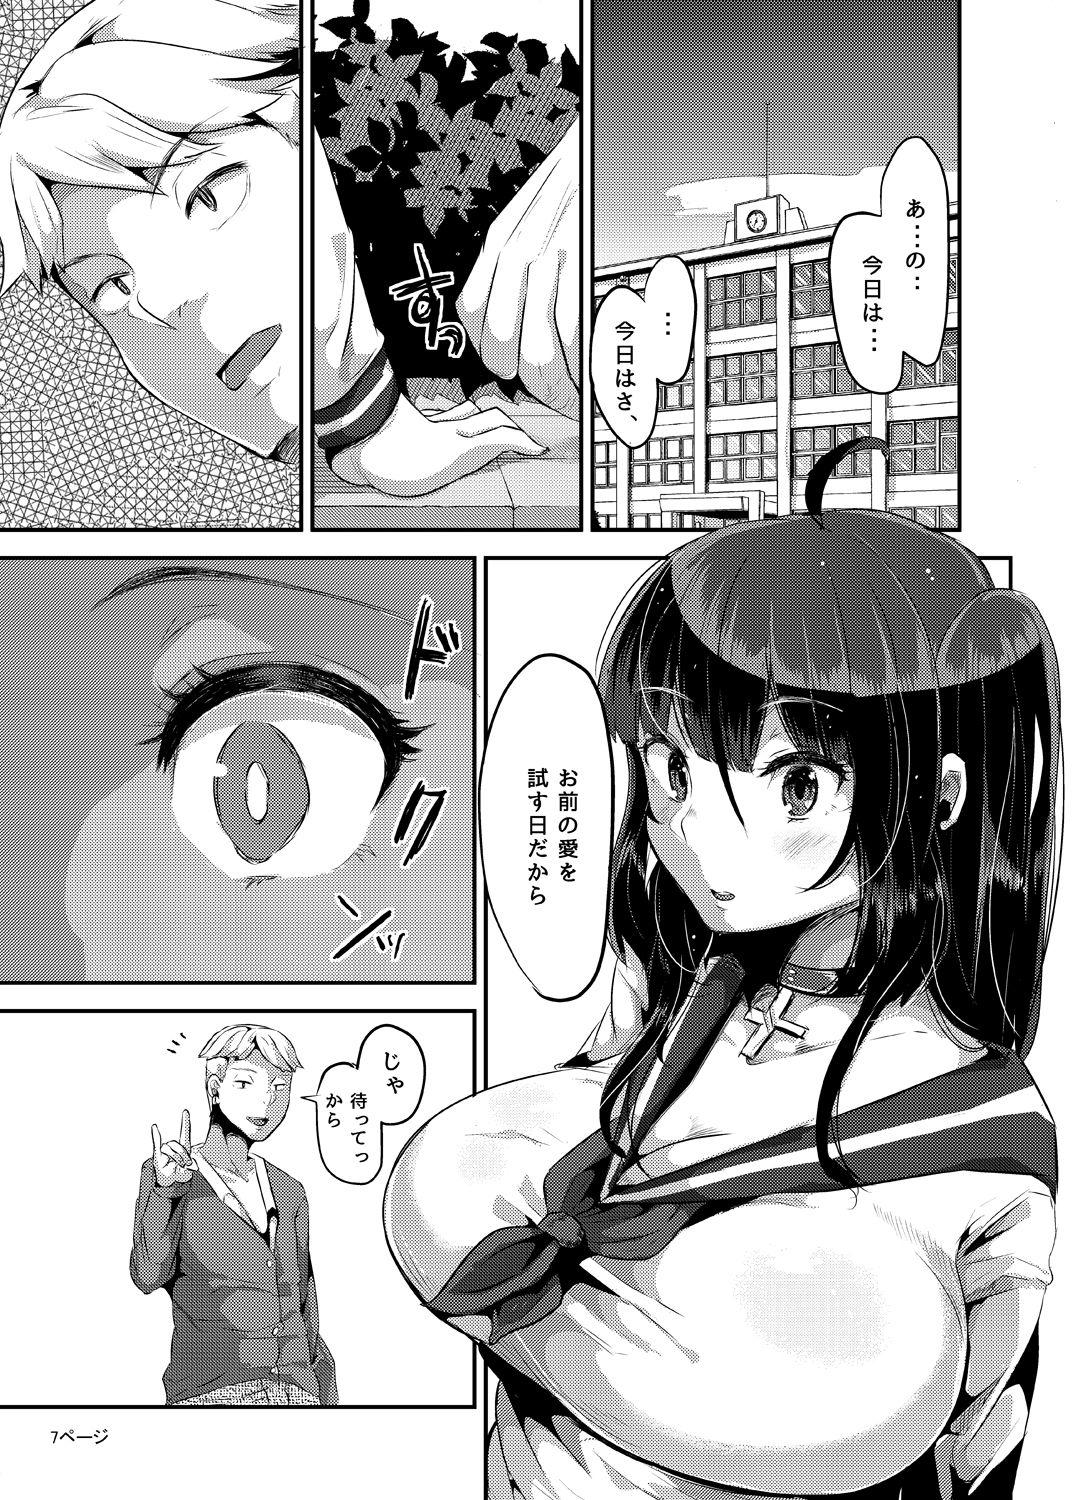 Cheating Sukisukisukisukisukisukisukisuki ver. 3 Naija - Page 8